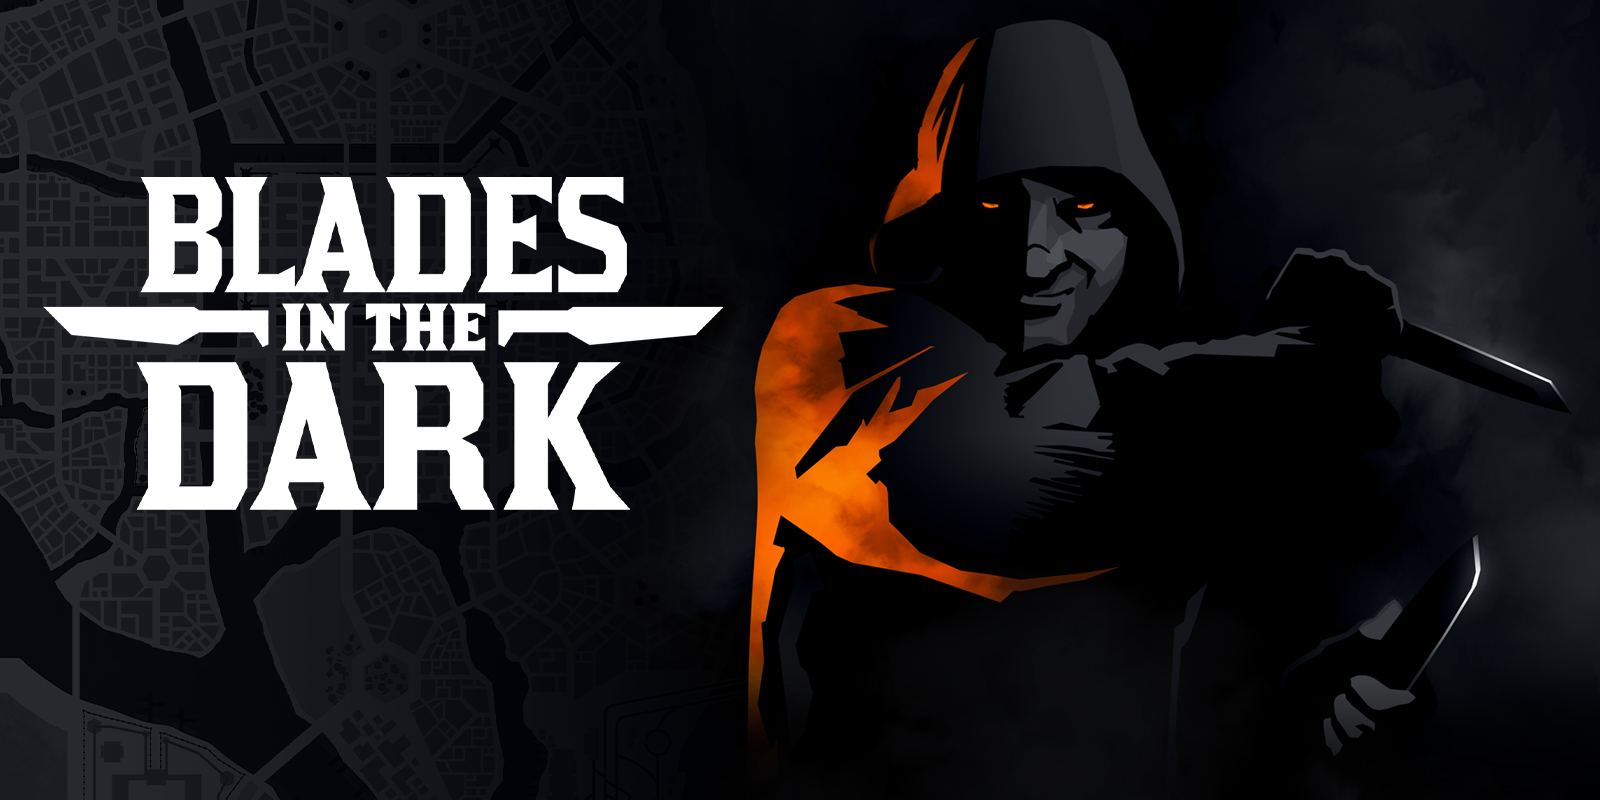 Introduction to Blades in the Dark by Griff's Games